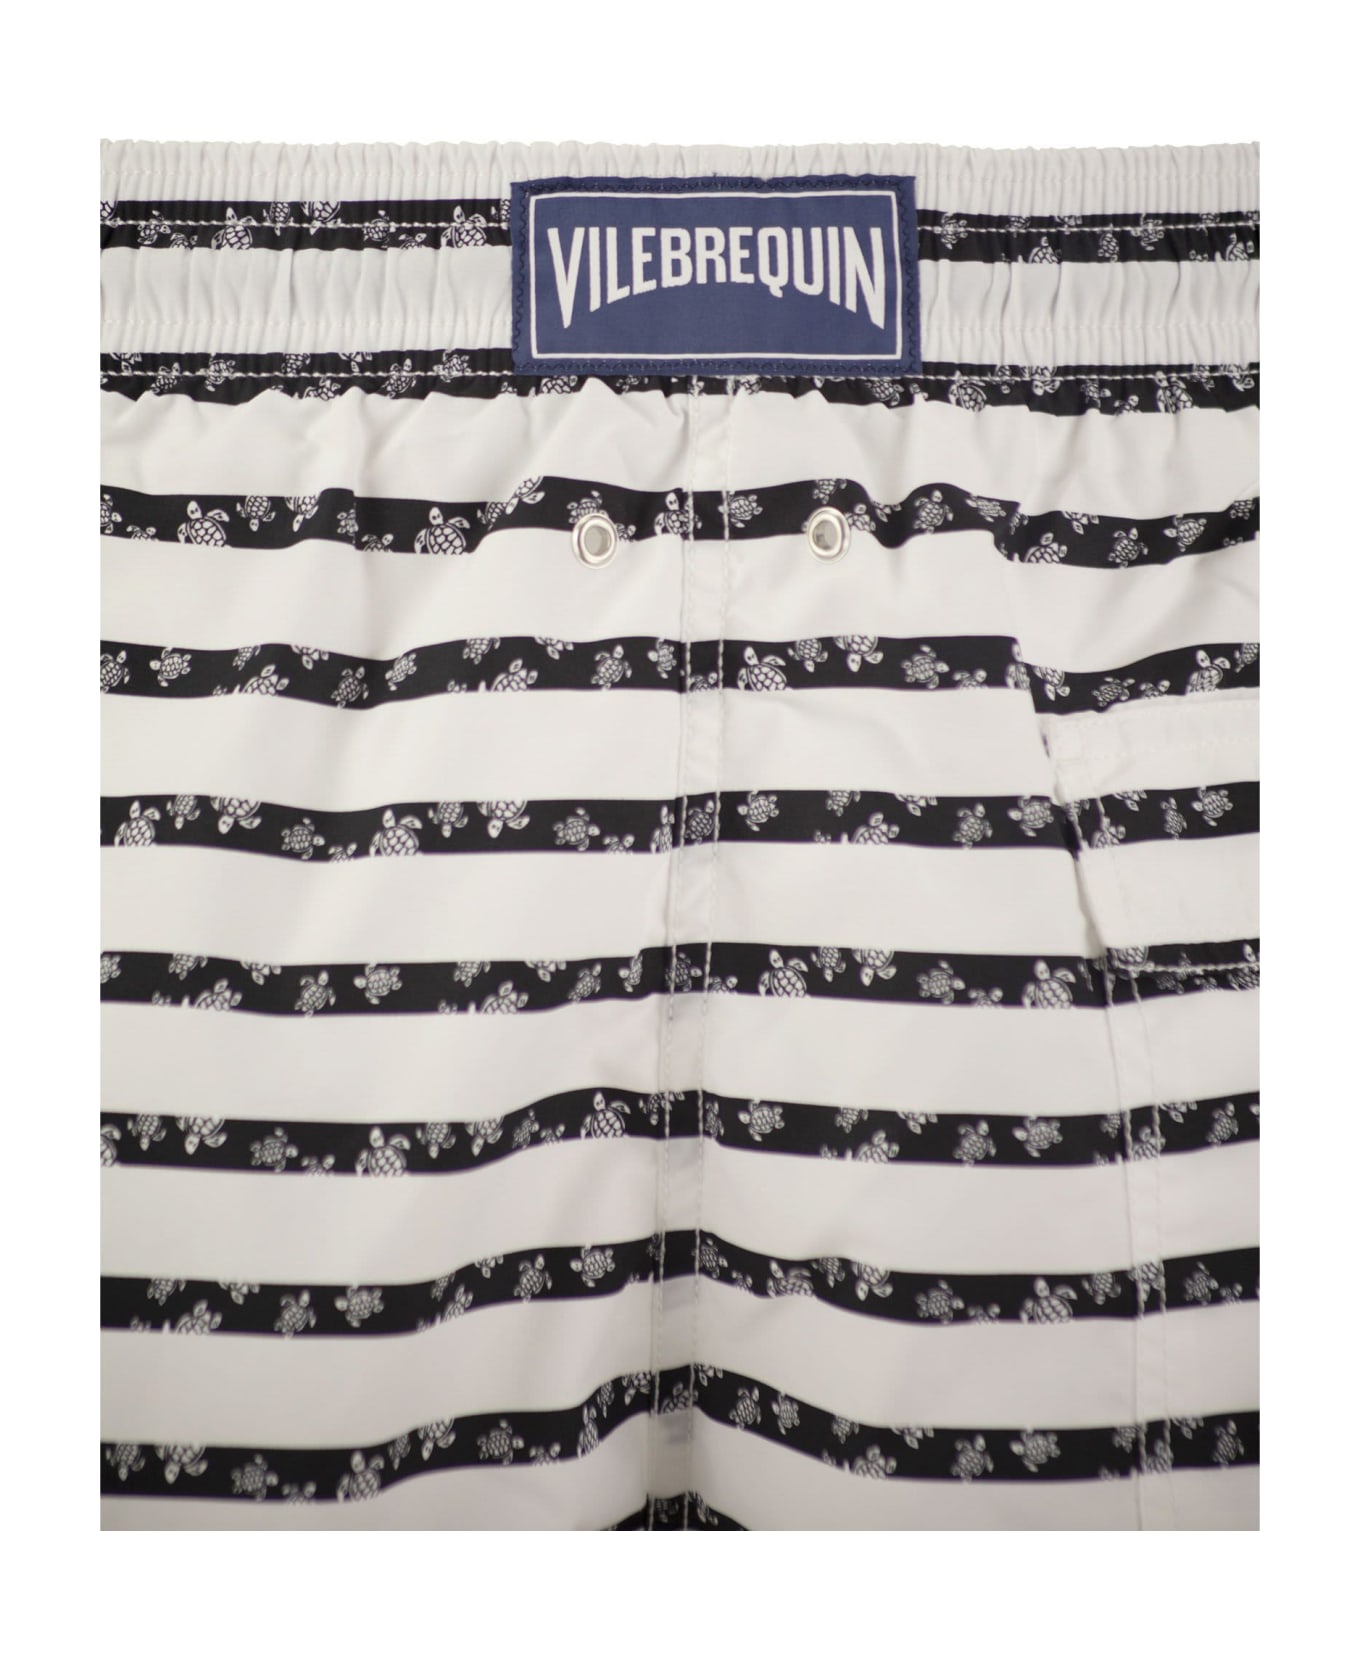 Vilebrequin Striped And Patterned Beach Shorts - White/blue